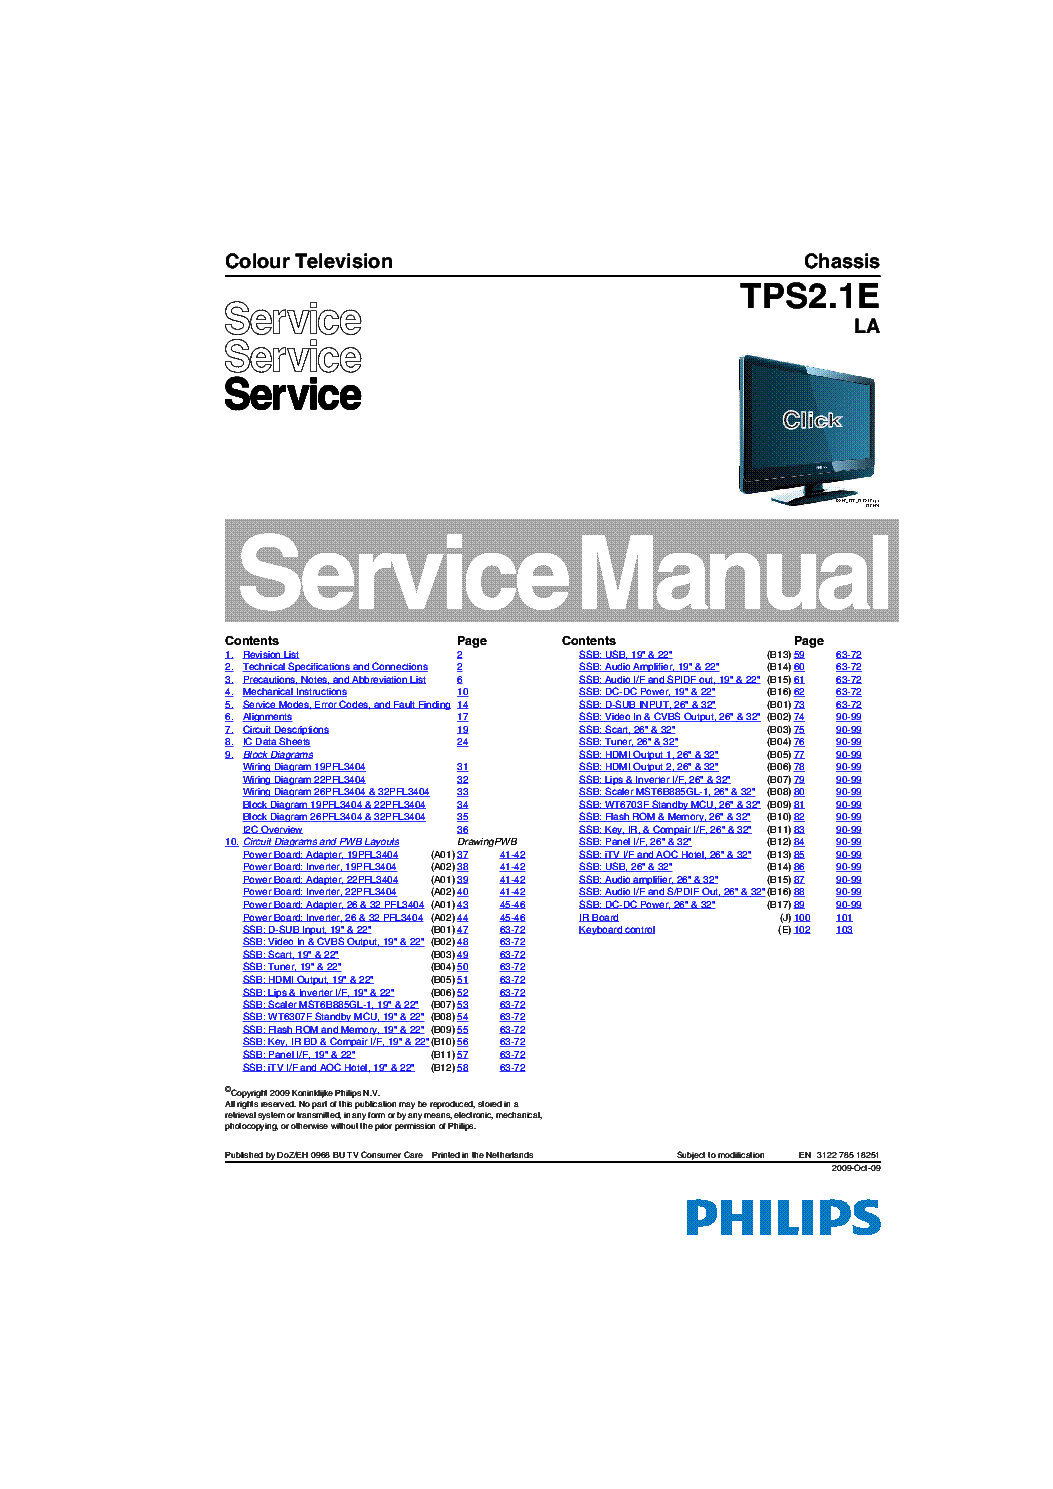 PHILIPS TPS2.1ELA 312278518251 091009 19-22-26-32PFL3404 service manual (1st page)